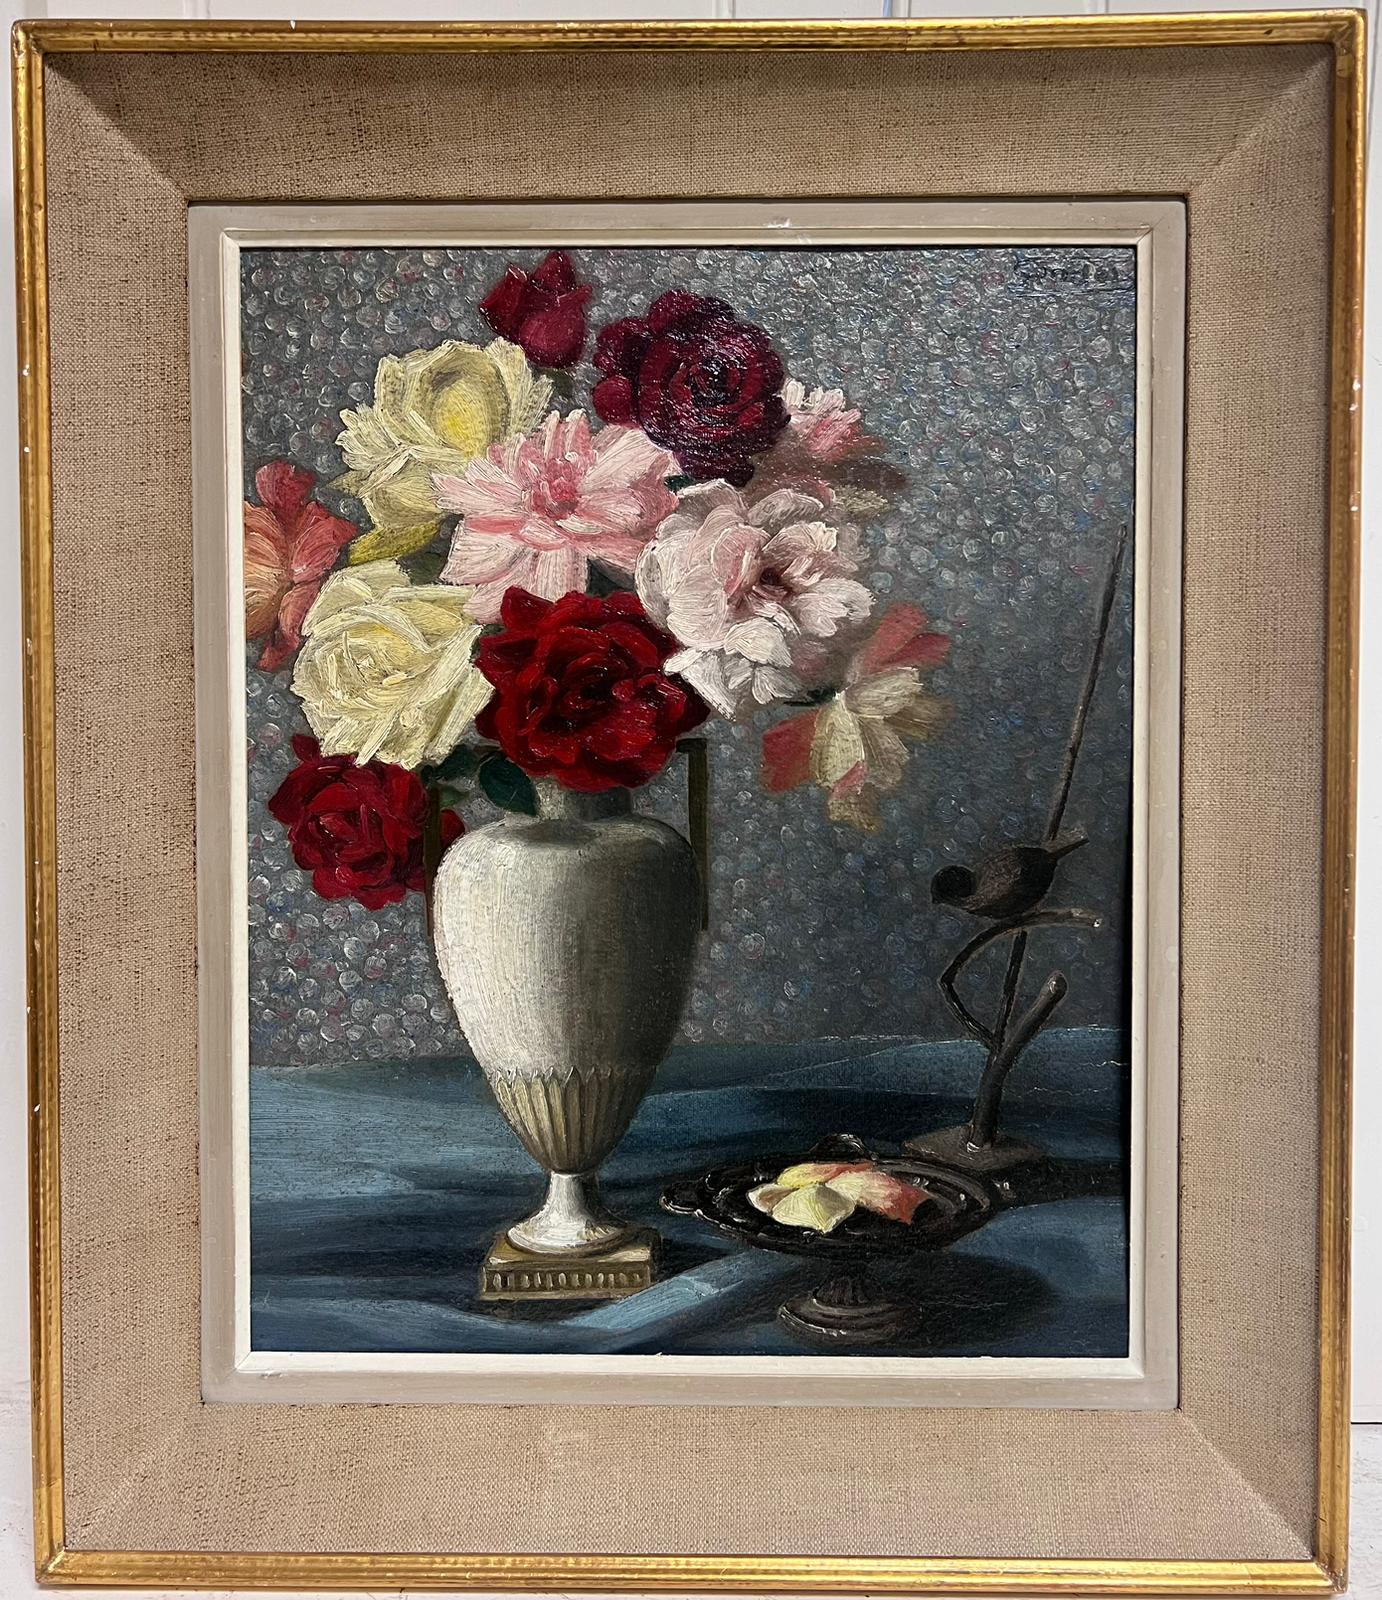 Flowers in Interior
French School, circa 1950's
indistinctly signed upper corner
oil on board, framed
framed: 23 x 20 inches
board: 18 x 15 inches
provenance: private collection, France
condition: very good and sound condition